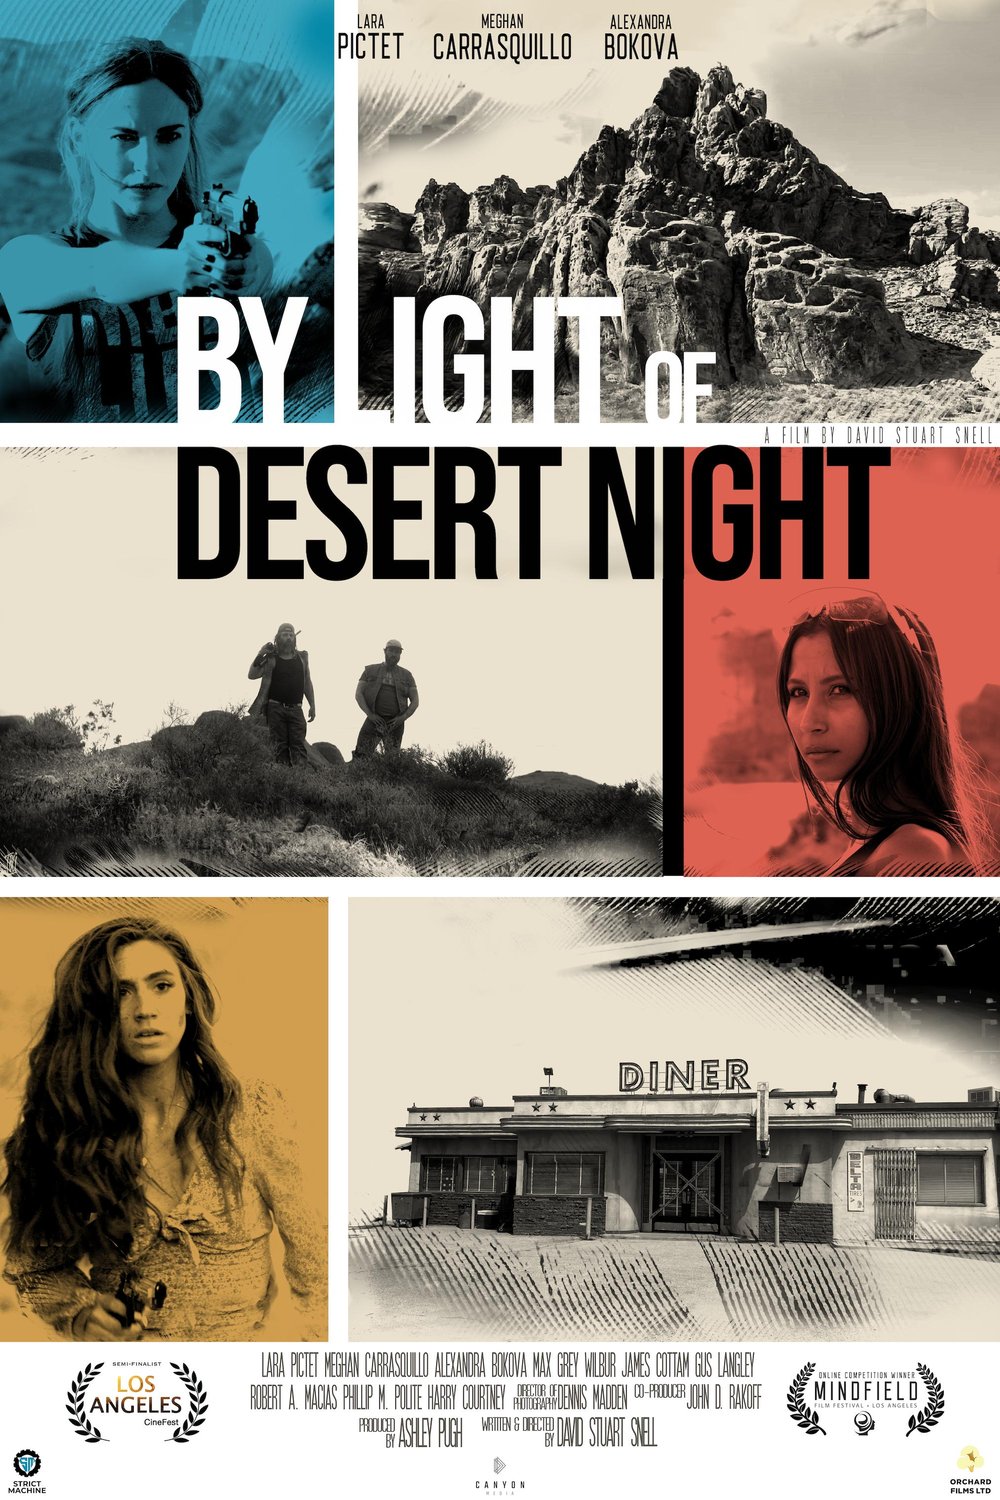 Poster of the movie By Light of Desert Night